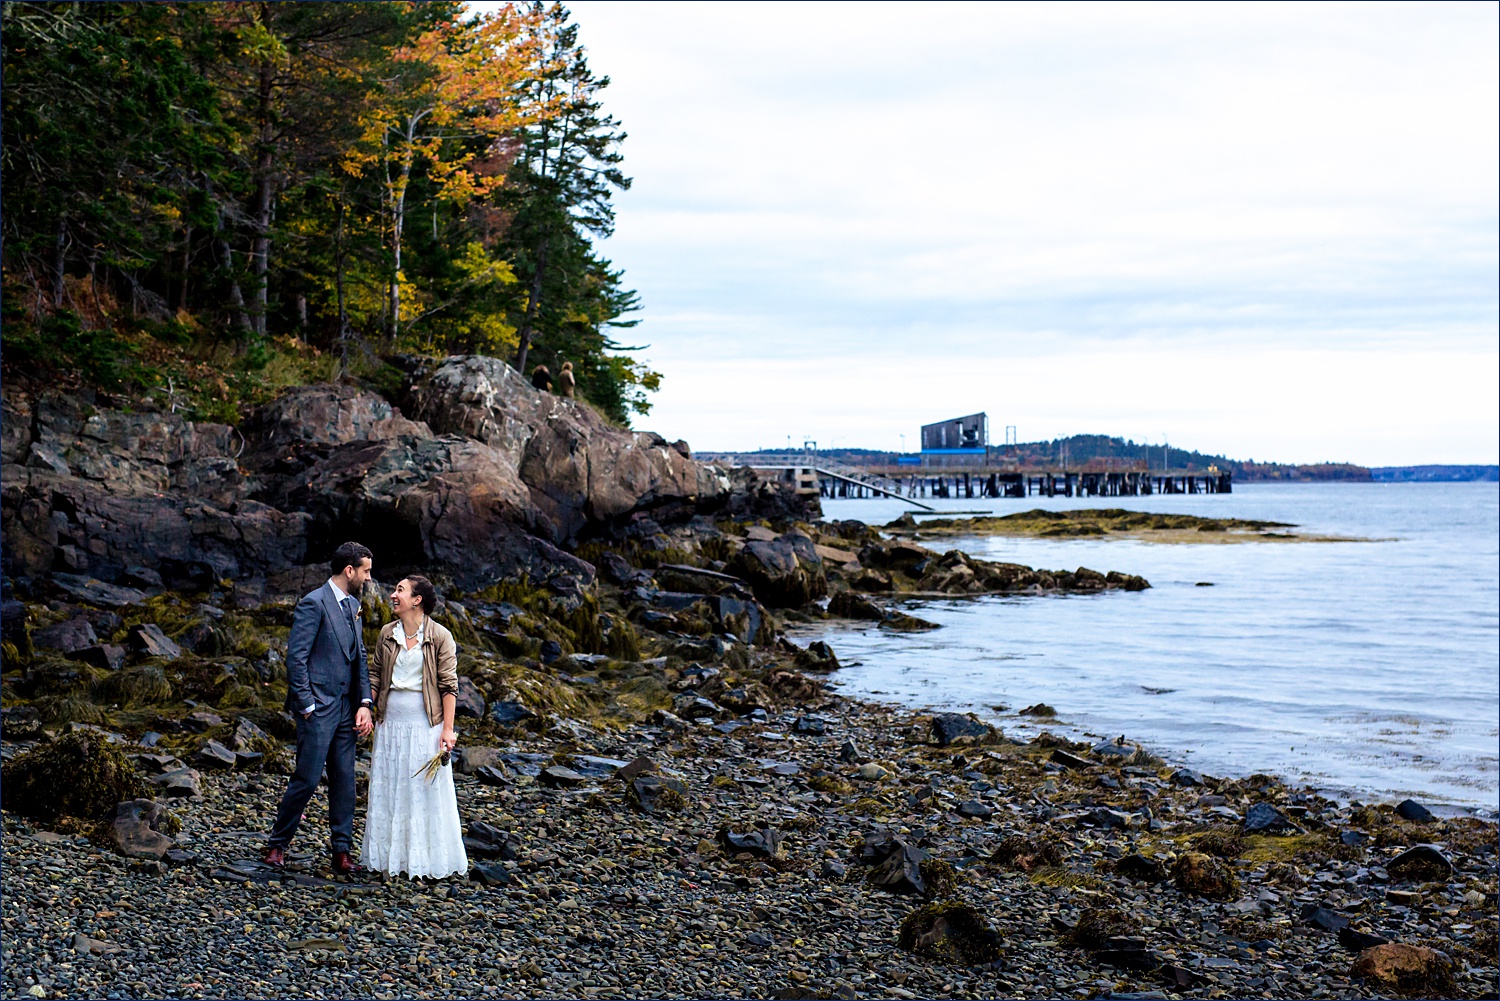 The newlyweds on the rocky beaches of Bar Harbor Maine on their wedding day